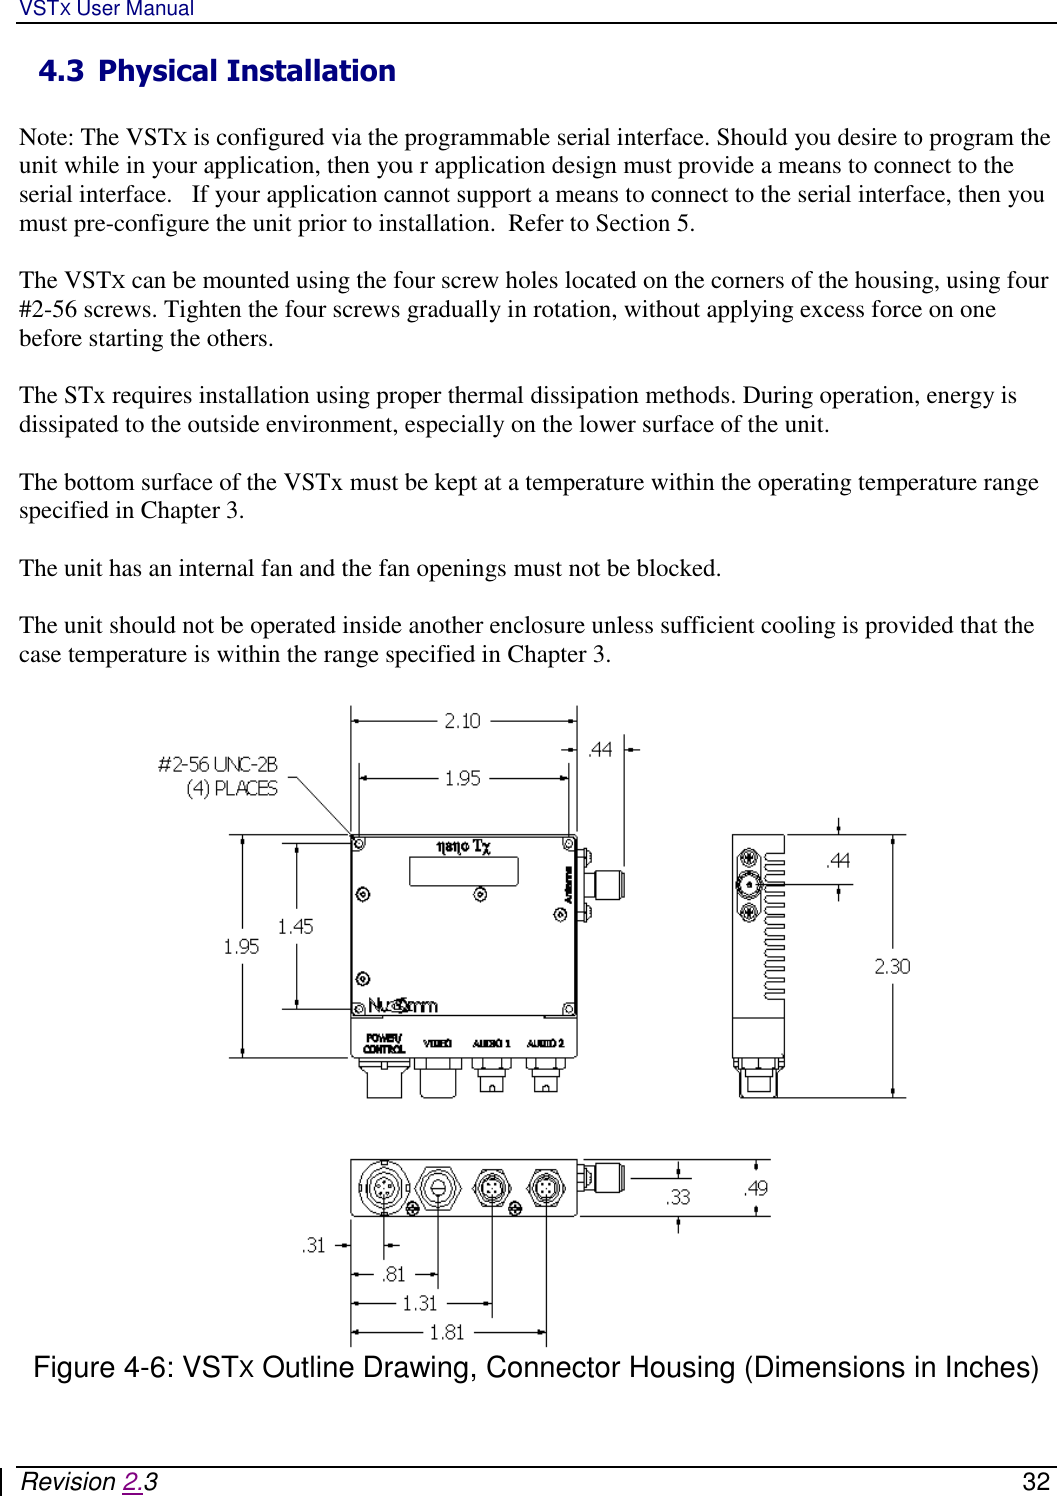 VSTX User Manual   Revision 2.3    32 4.3 Physical Installation  Note: The VSTX is configured via the programmable serial interface. Should you desire to program the unit while in your application, then you r application design must provide a means to connect to the serial interface.   If your application cannot support a means to connect to the serial interface, then you must pre-configure the unit prior to installation.  Refer to Section 5.  The VSTX can be mounted using the four screw holes located on the corners of the housing, using four #2-56 screws. Tighten the four screws gradually in rotation, without applying excess force on one before starting the others.   The STx requires installation using proper thermal dissipation methods. During operation, energy is dissipated to the outside environment, especially on the lower surface of the unit.  The bottom surface of the VSTx must be kept at a temperature within the operating temperature range specified in Chapter 3.   The unit has an internal fan and the fan openings must not be blocked.     The unit should not be operated inside another enclosure unless sufficient cooling is provided that the case temperature is within the range specified in Chapter 3.    Figure 4-6: VSTX Outline Drawing, Connector Housing (Dimensions in Inches)  